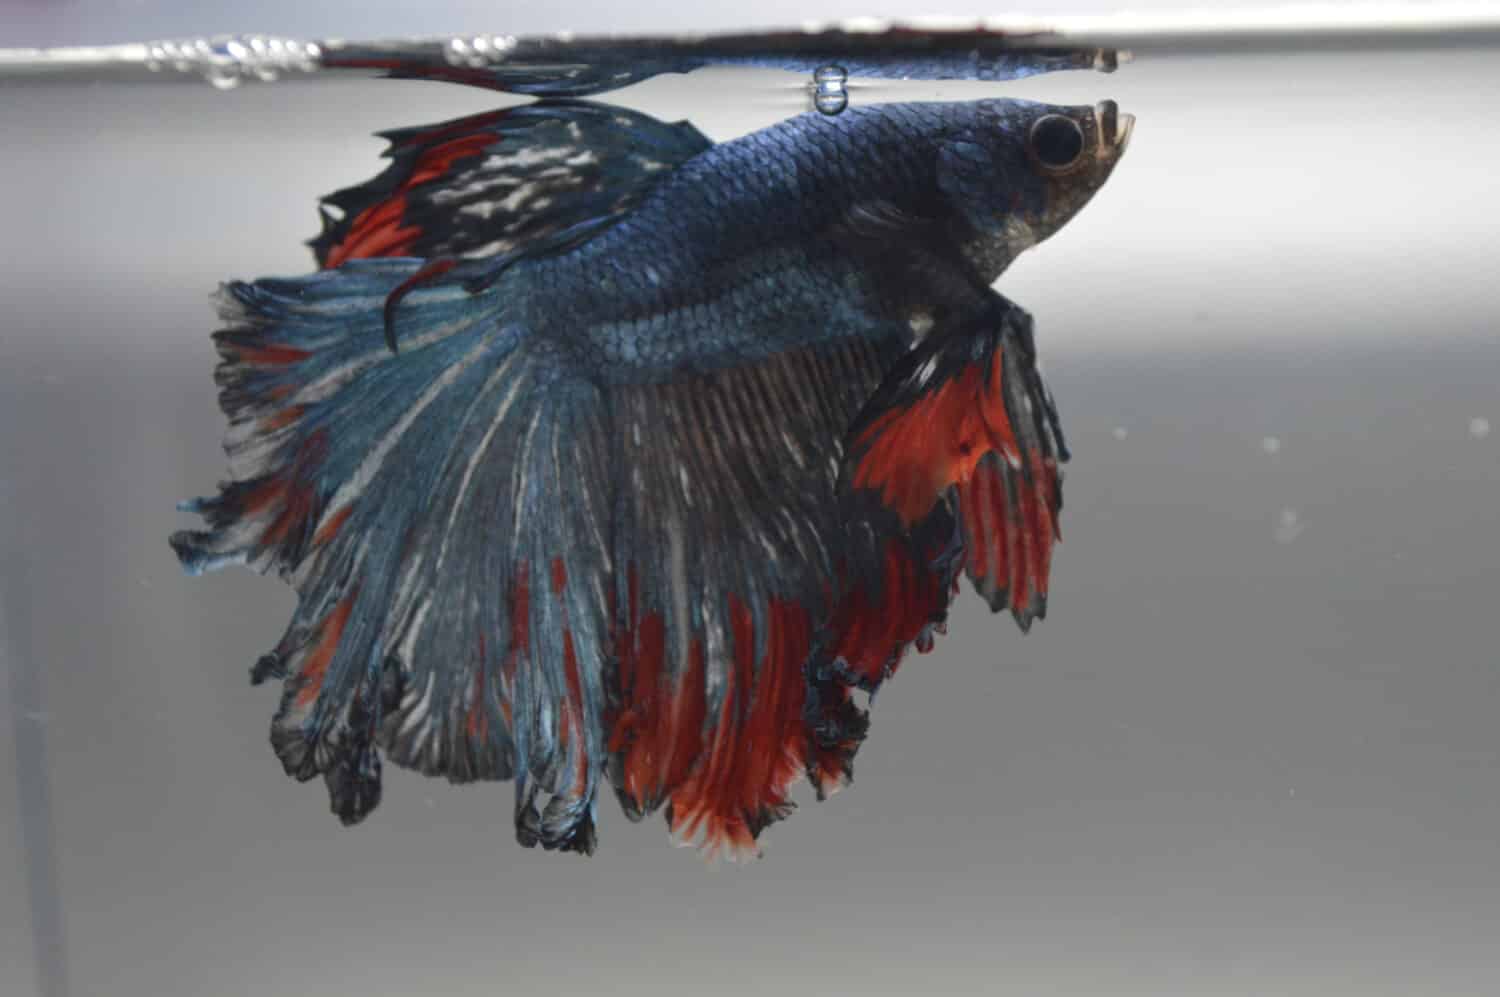 Patriot, the betta fish. He has fin rot due to a bacterial infection which is taken care of.